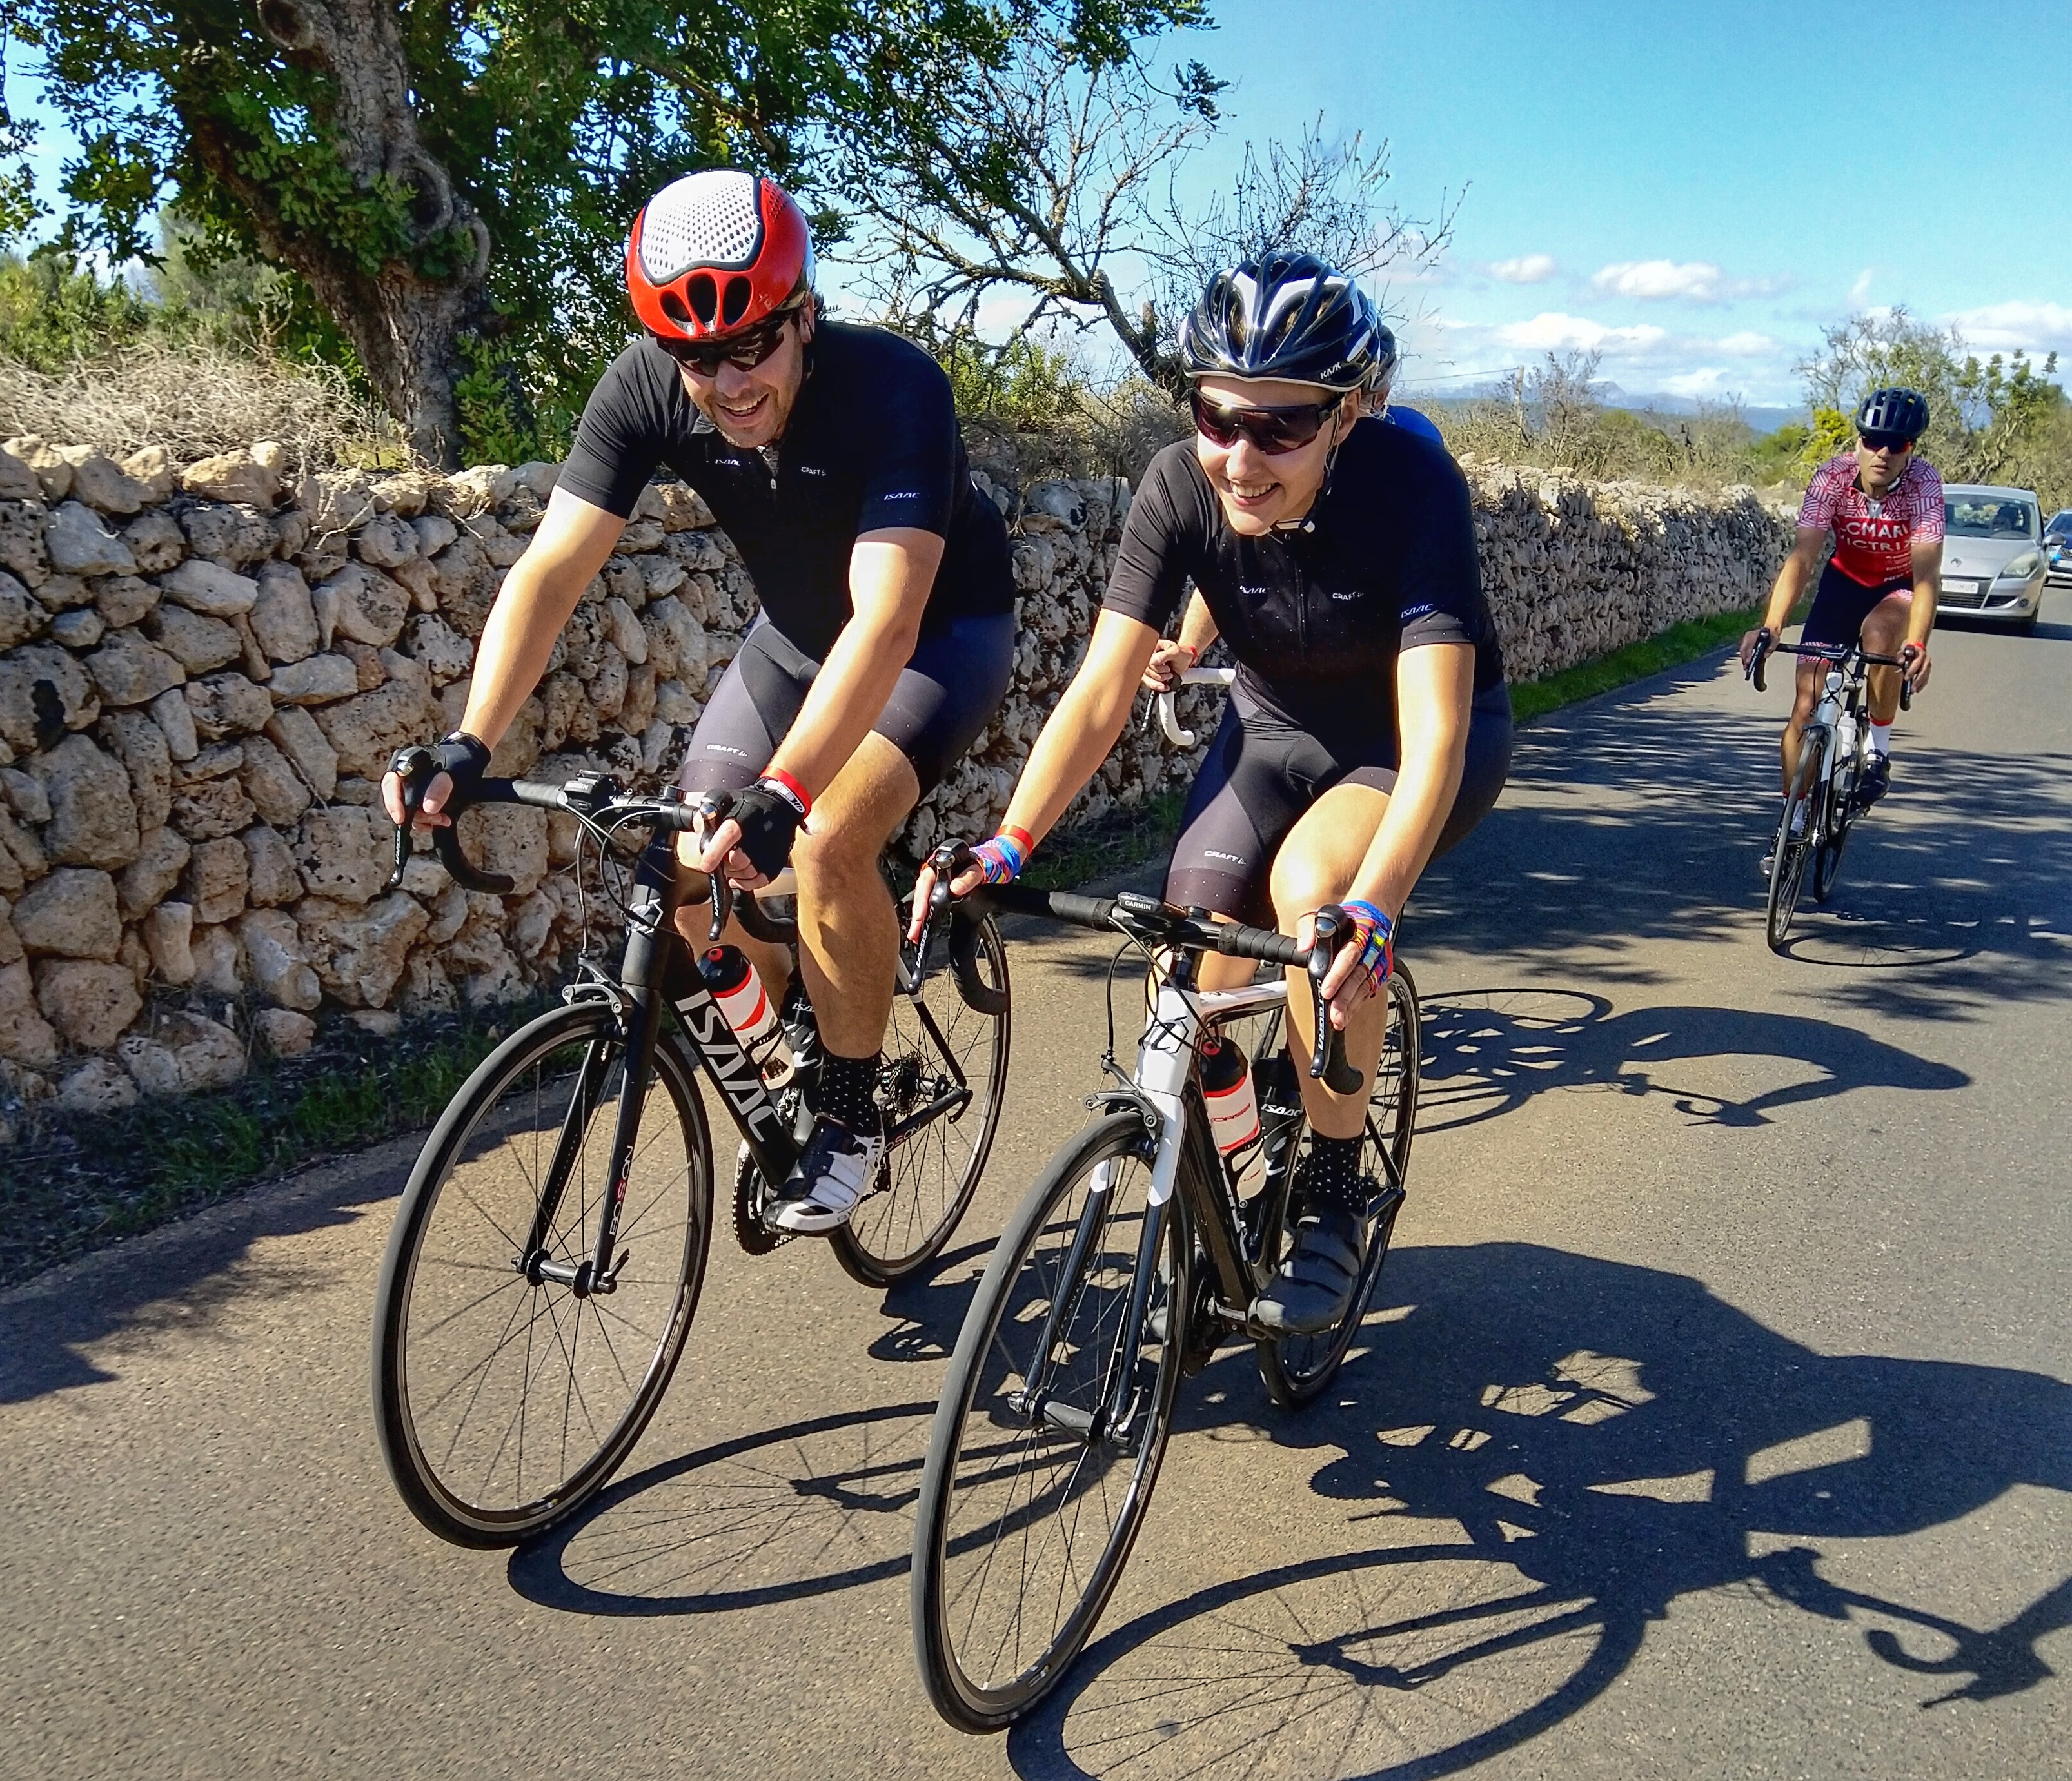 Dream cycling holiday in Majorca becomes a reality for Laura and Sam